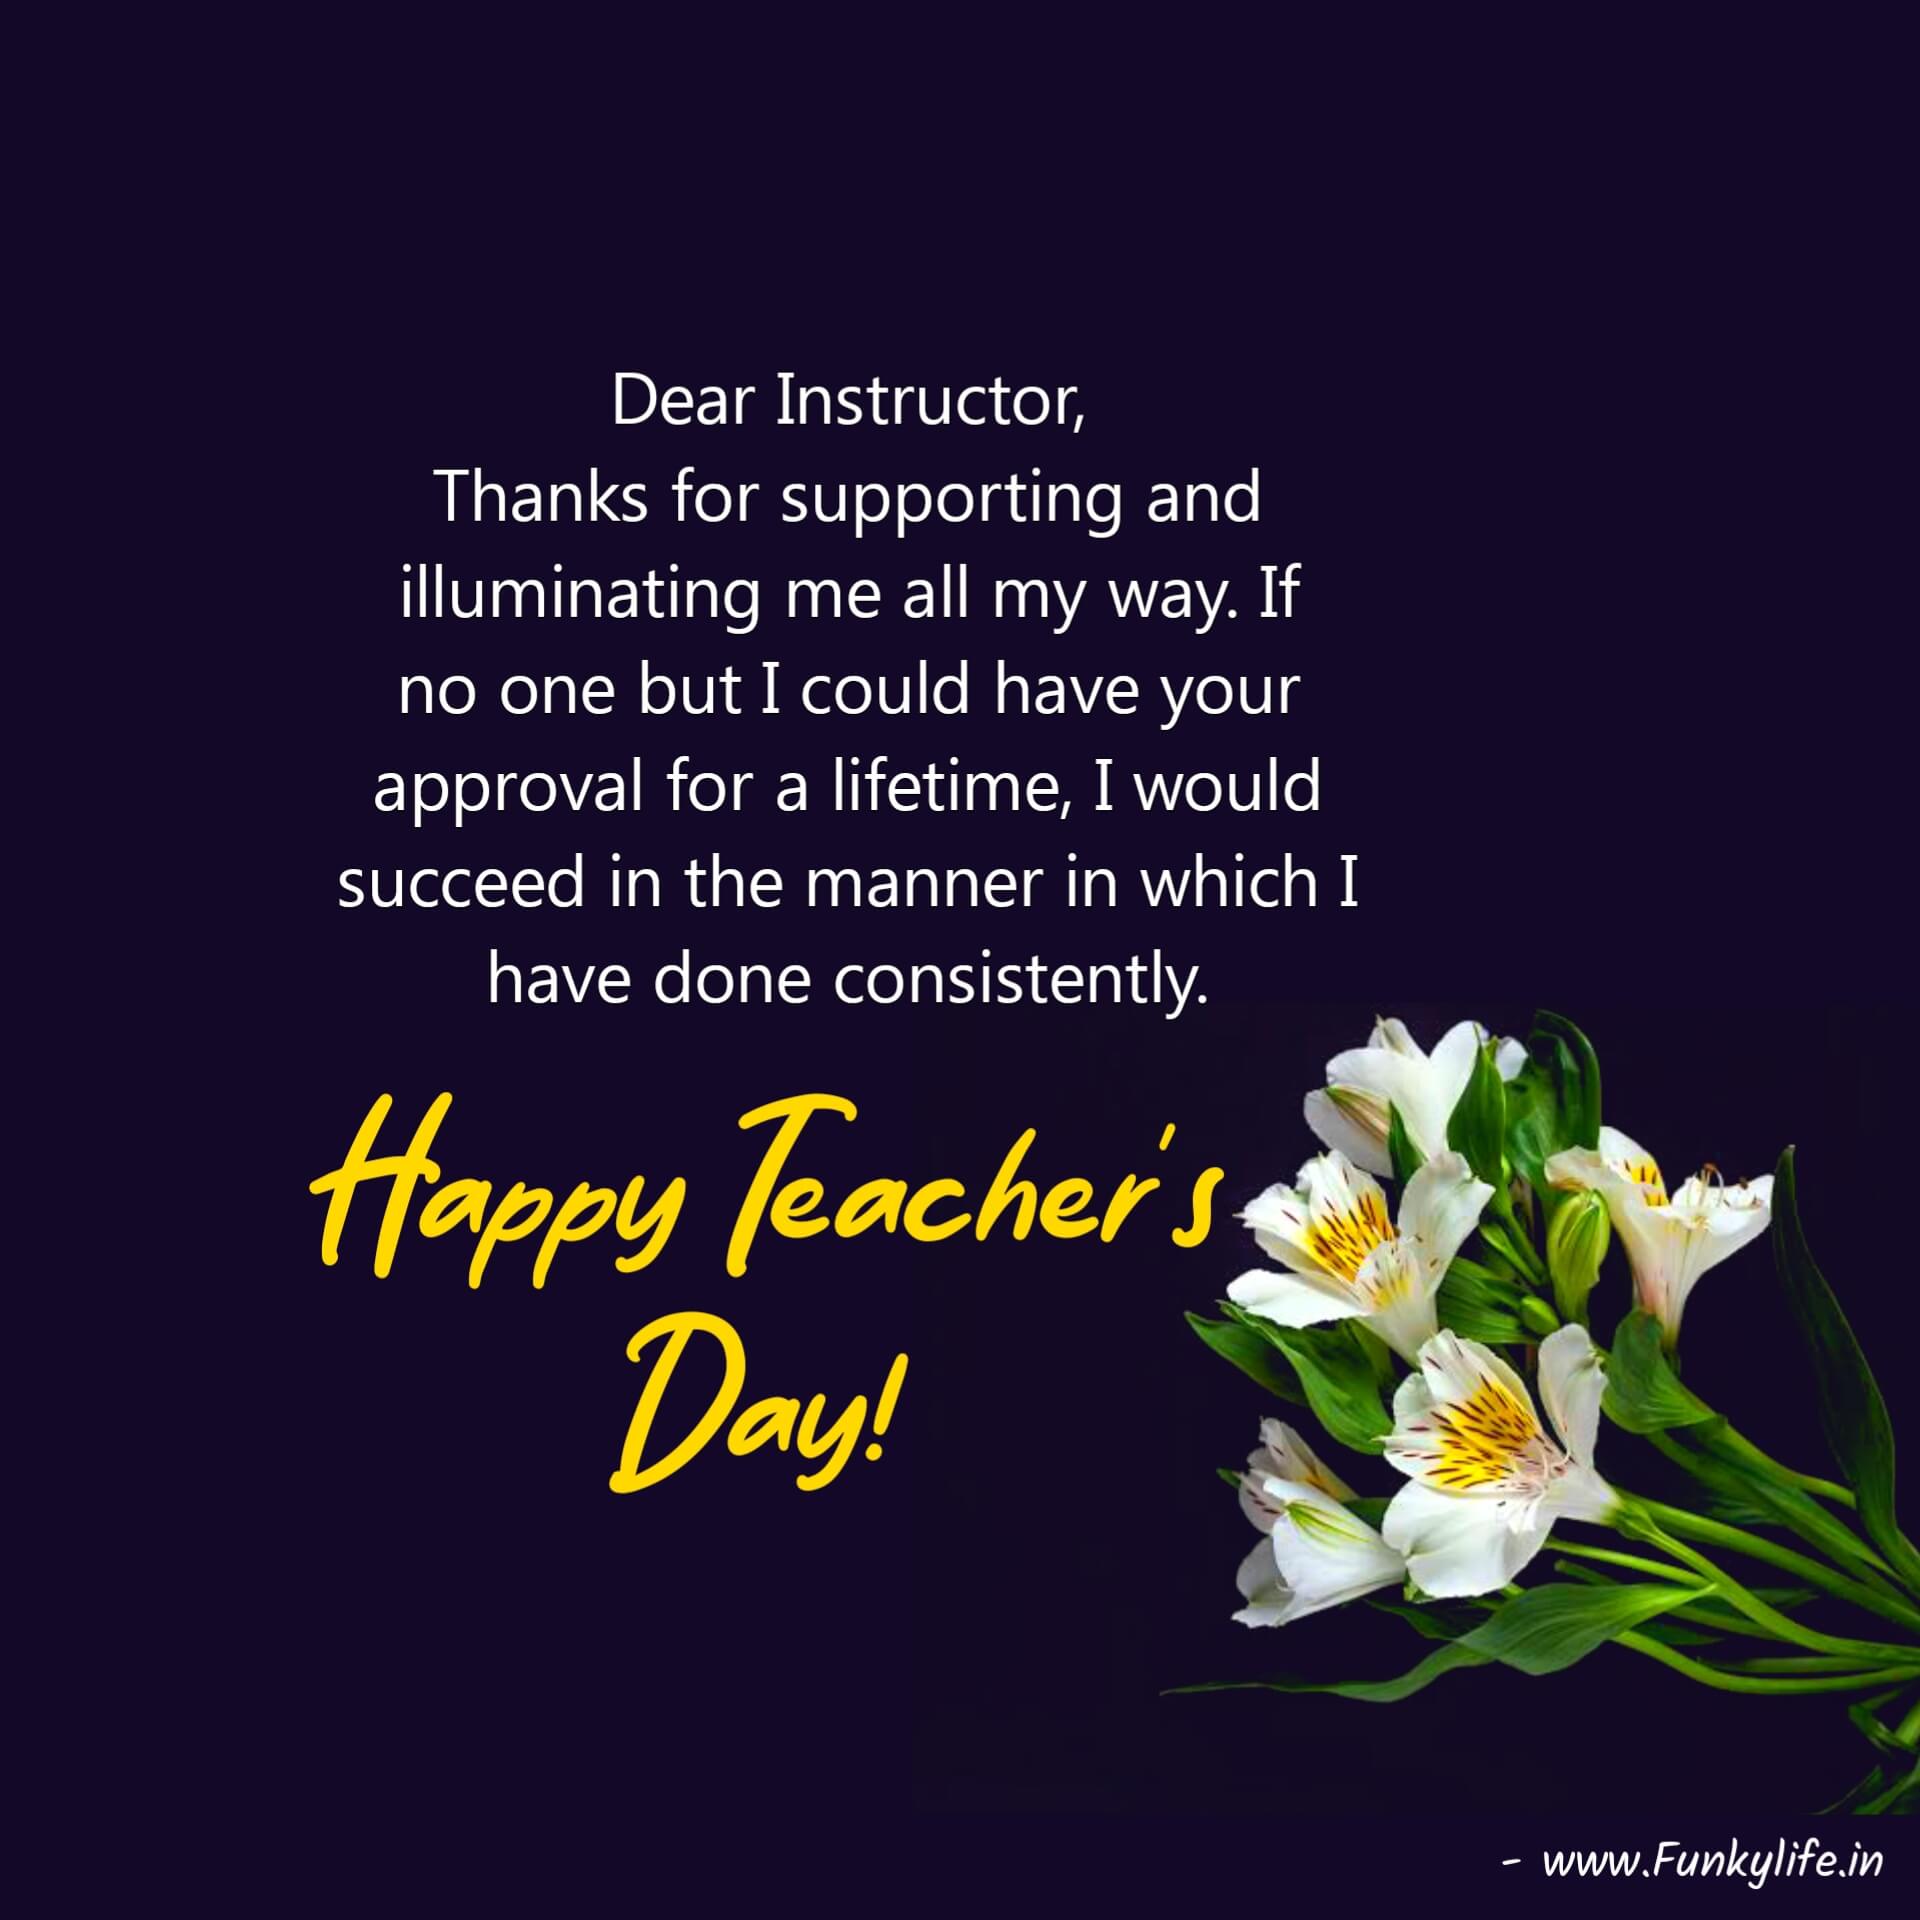 Teachers Day Wishes Quotes in English